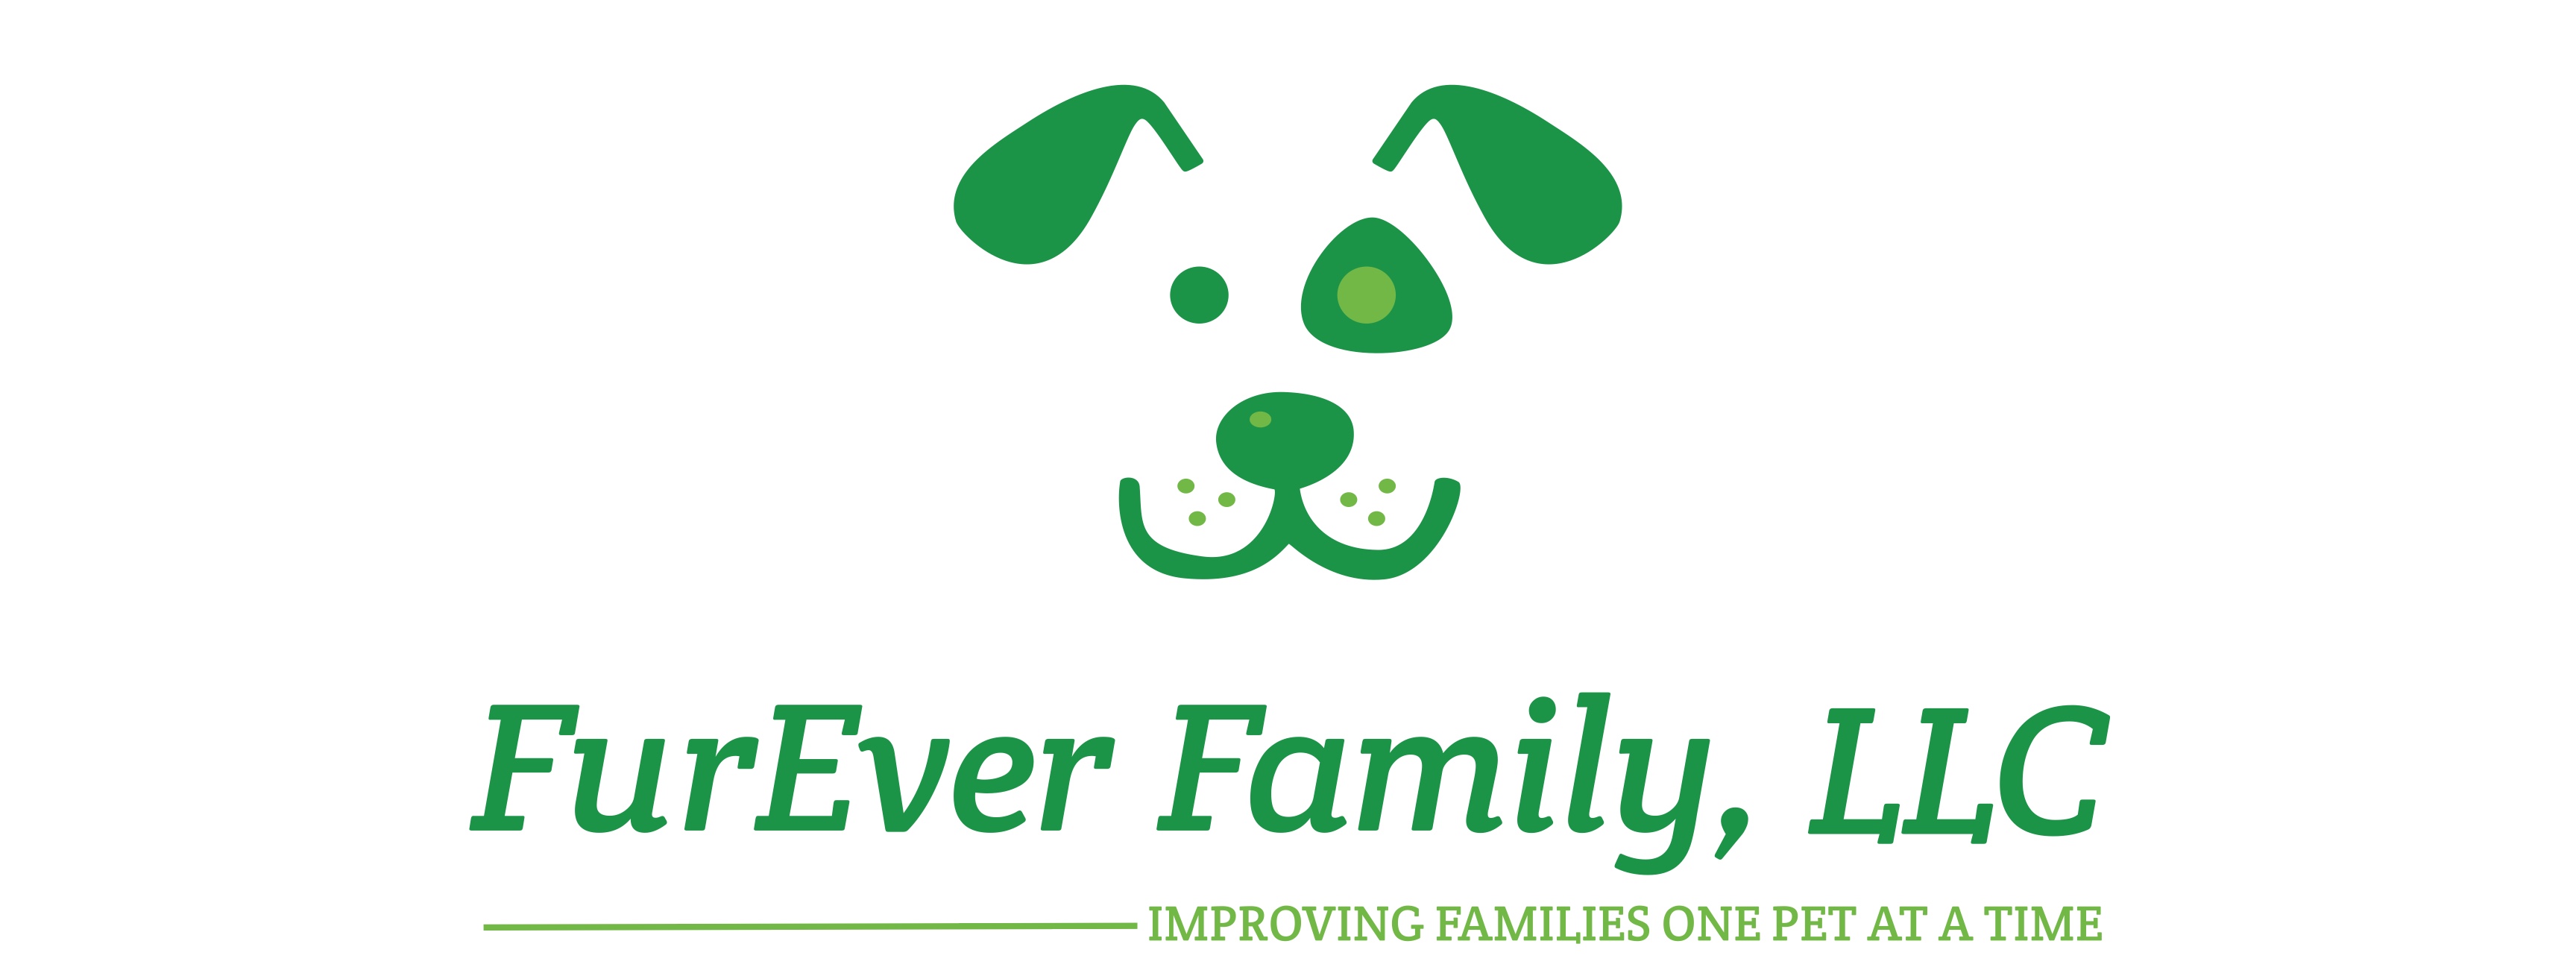 FurEver Family, LLC – Improving families one pet at a time.